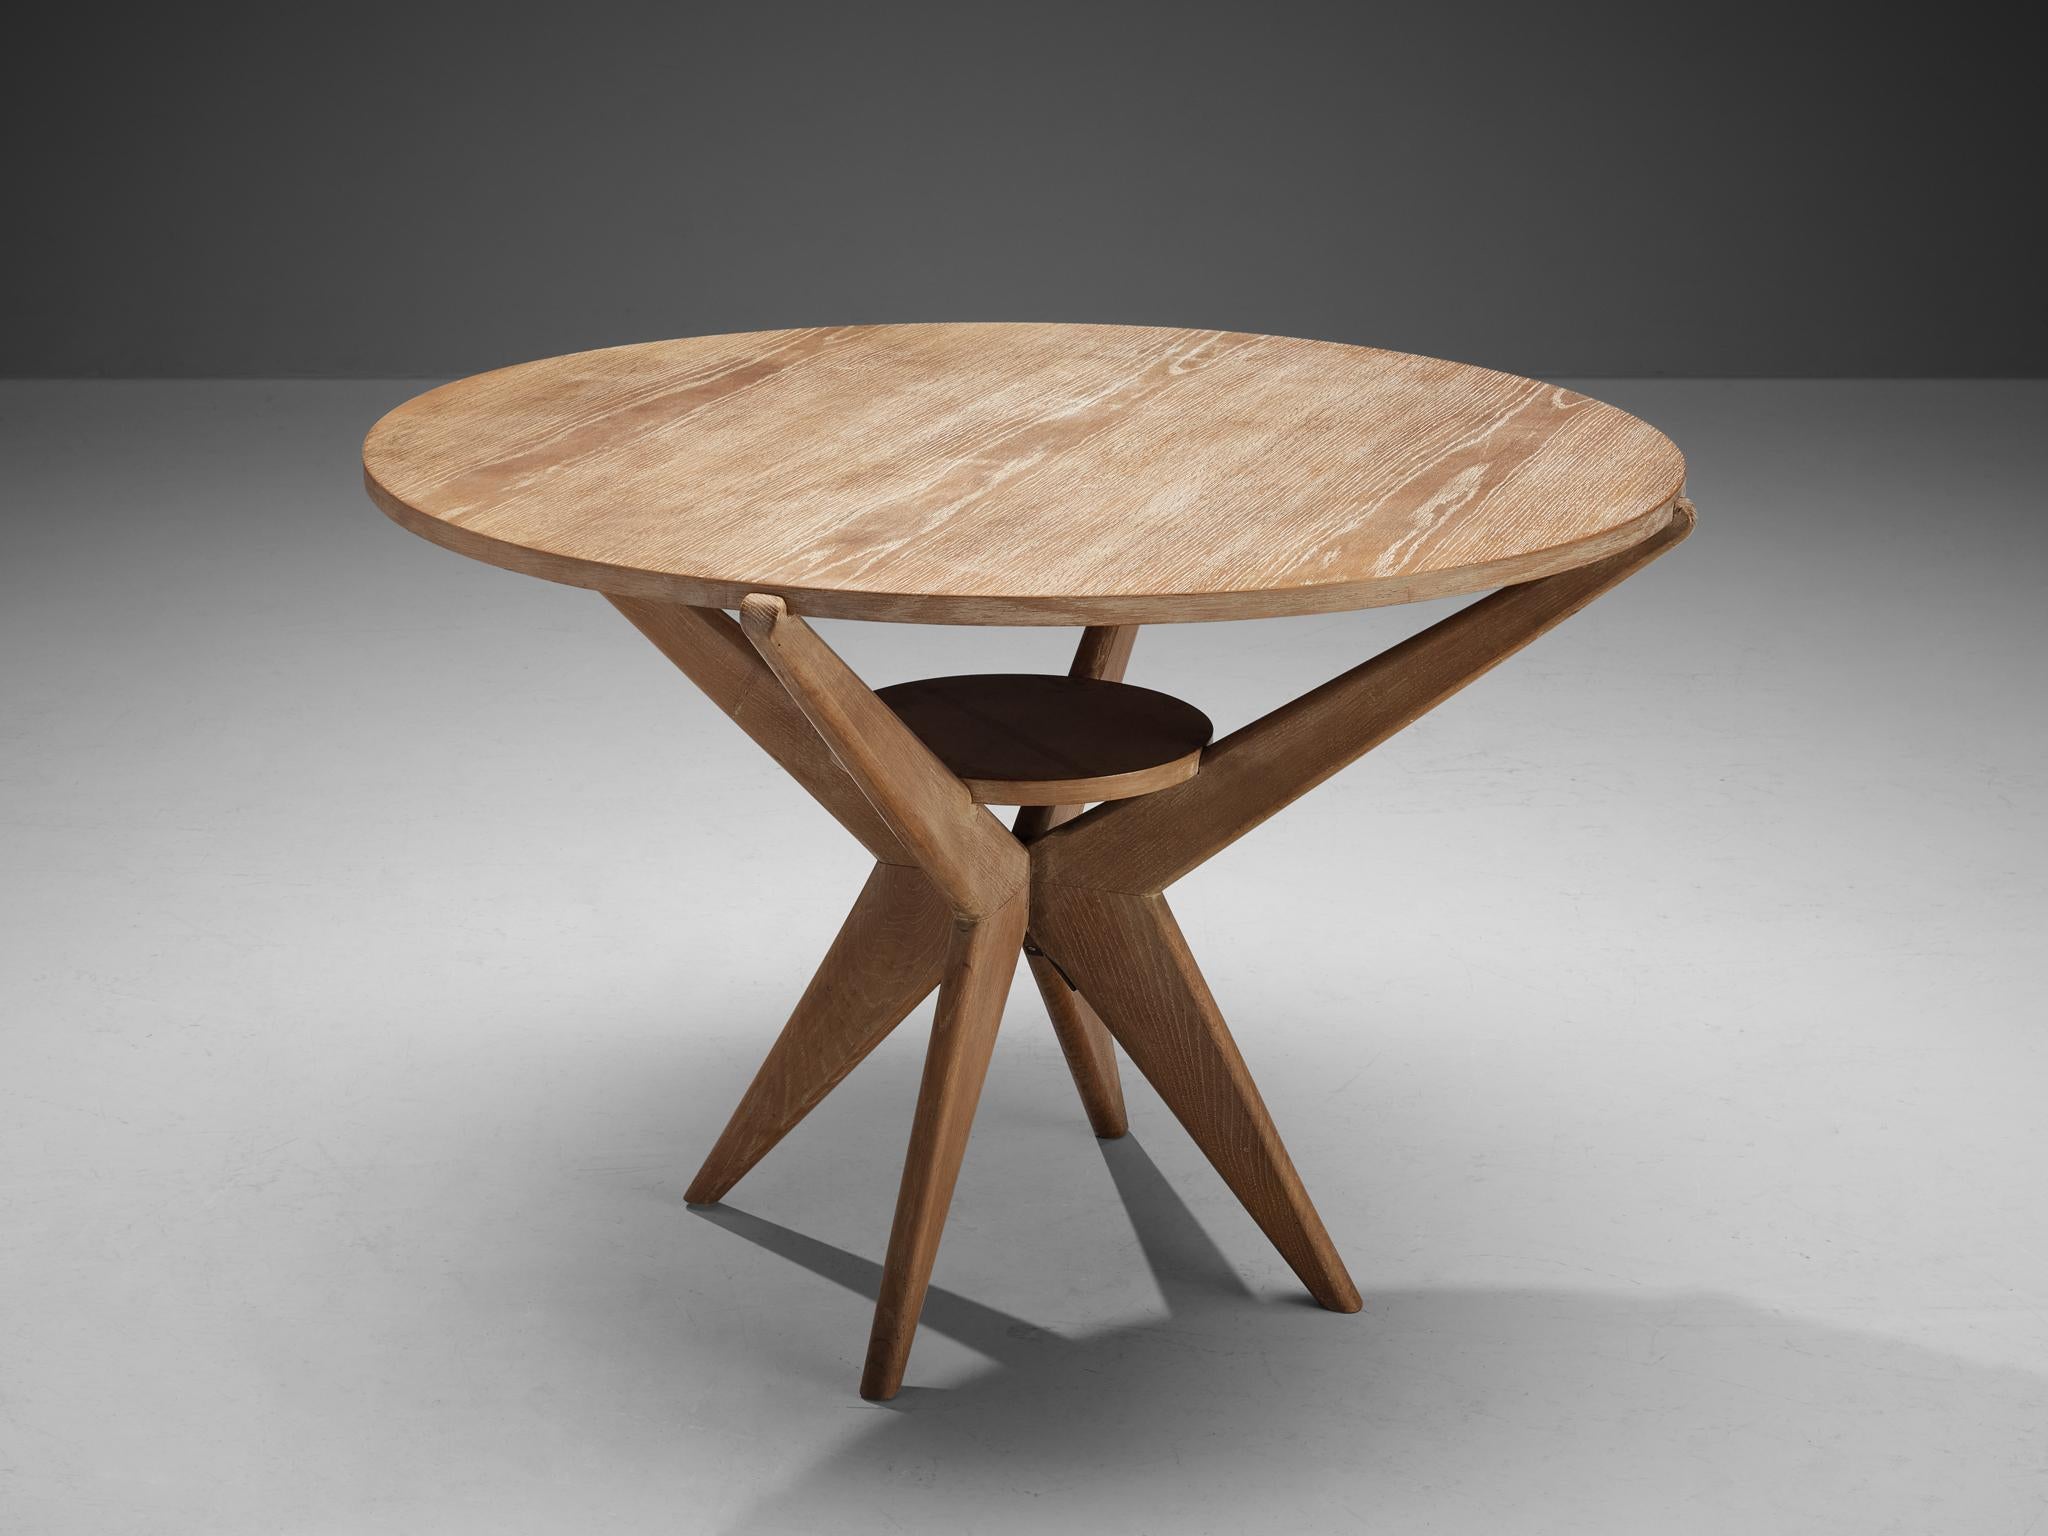 Dining or center table, cerused oak, Europe, 1960s 

This eccentric dining table is well-constructed in a precise manner implementing geometrical shapes and straight lines that contribute to its architectural appearance. In the highly sculptural